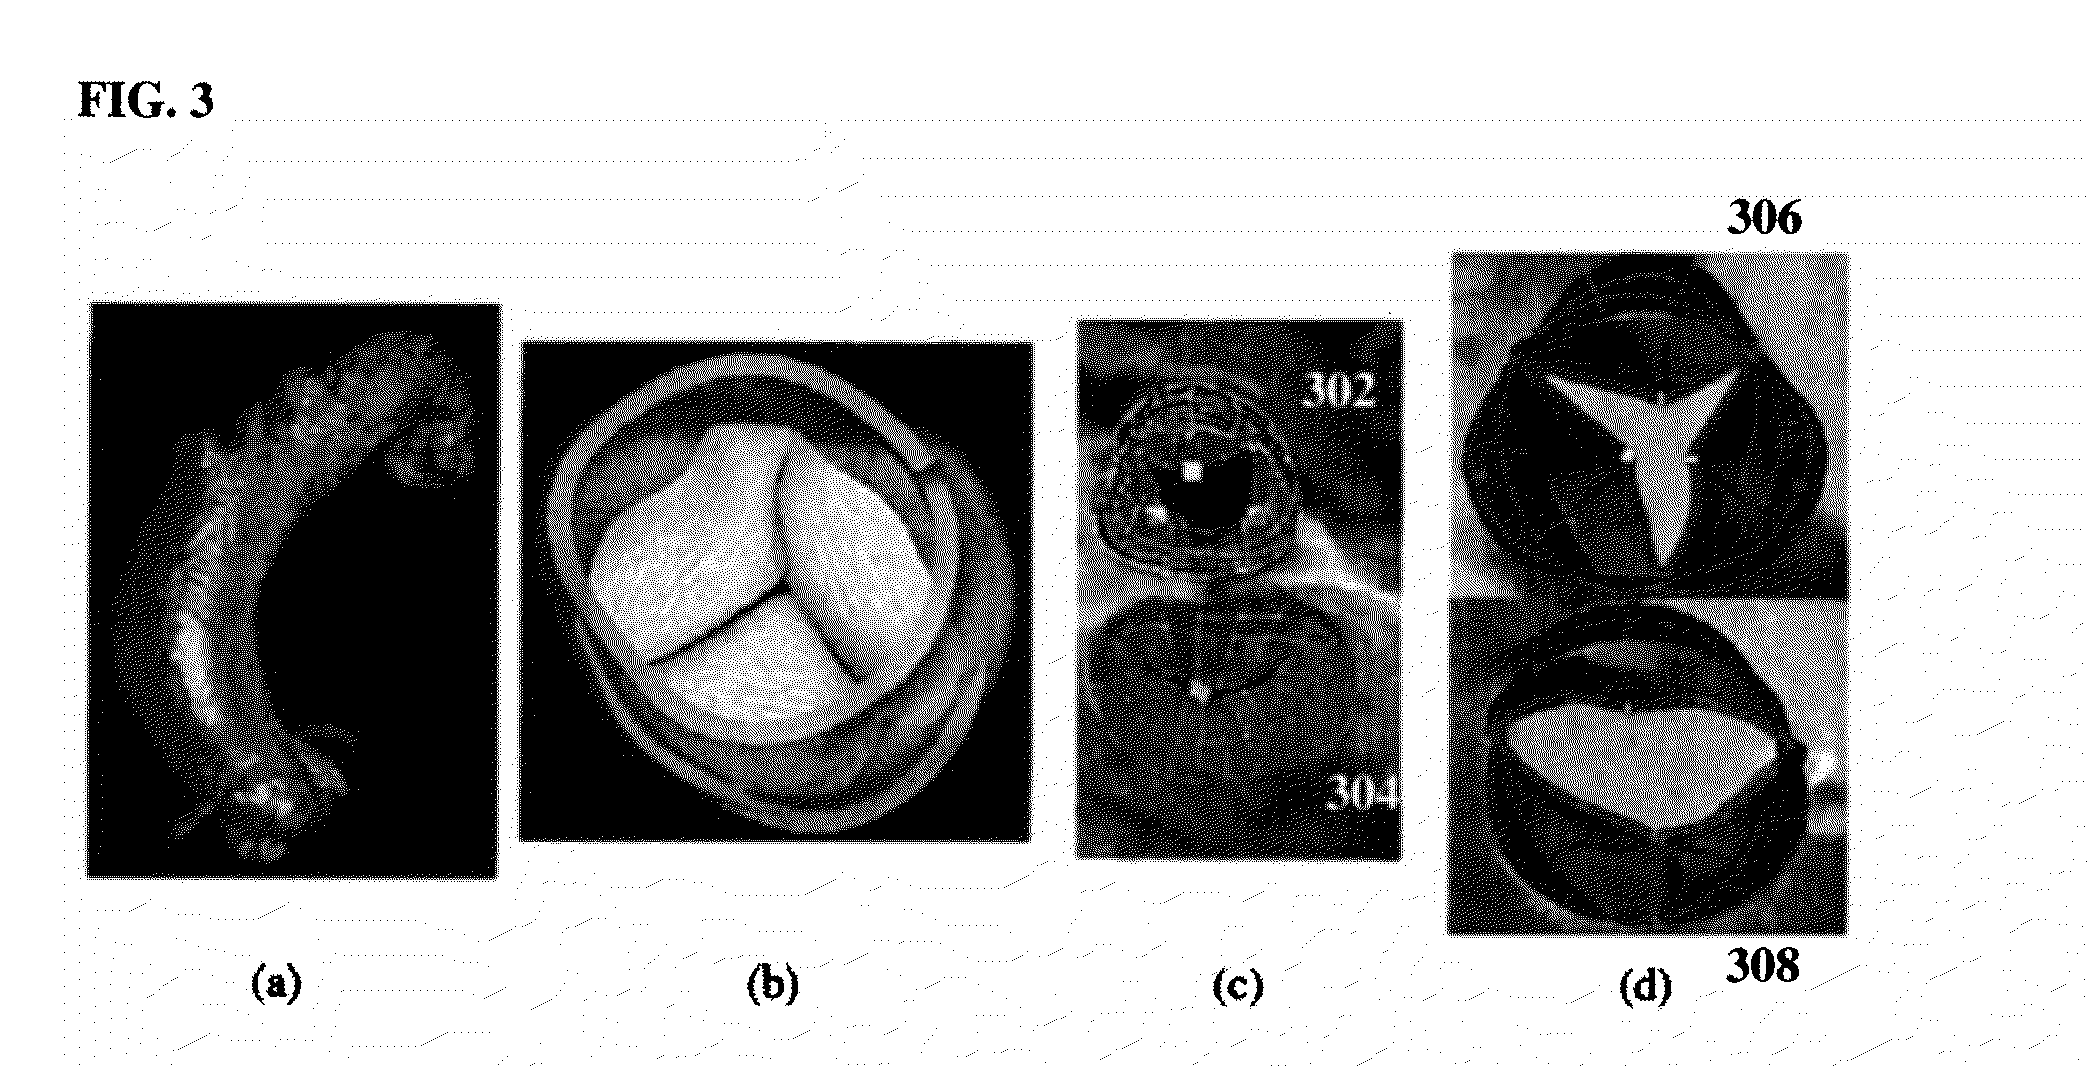 Method and system for computational modeling of the aorta and heart